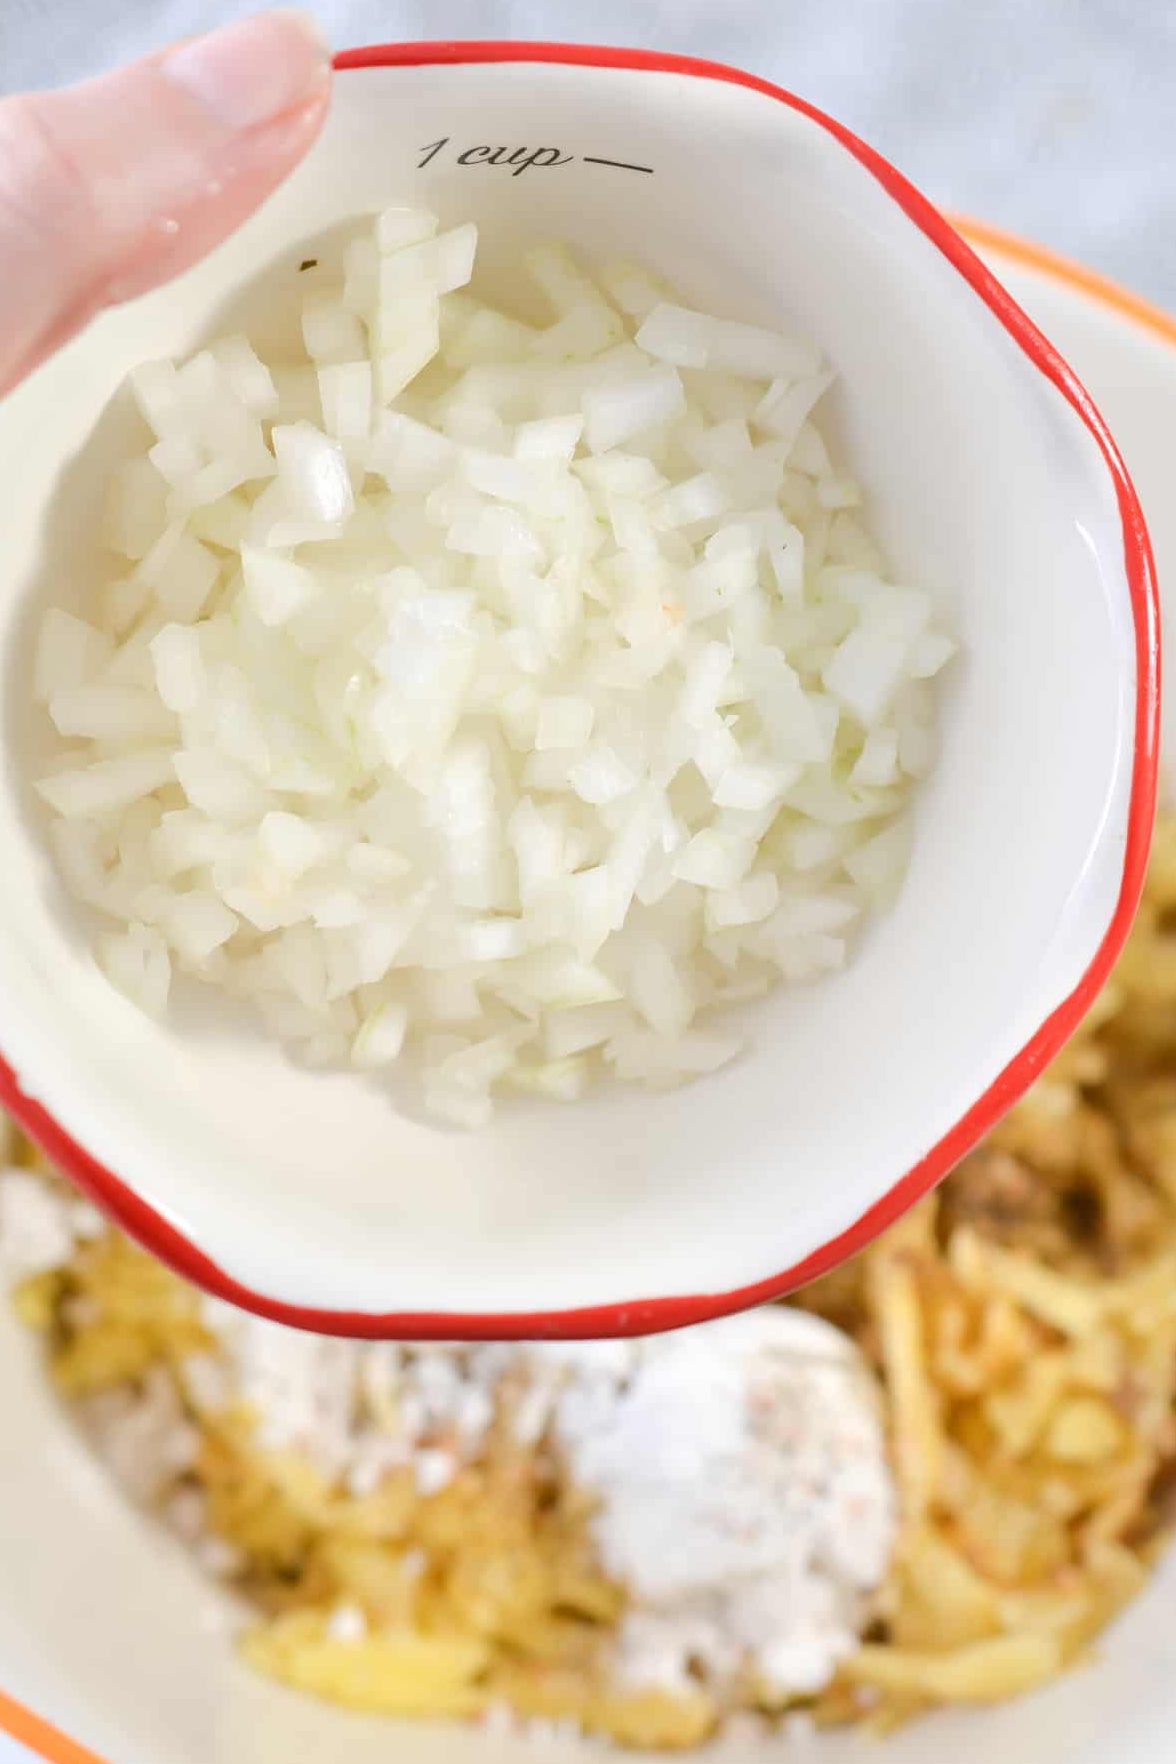 add ½ cup of finely chopped onion.